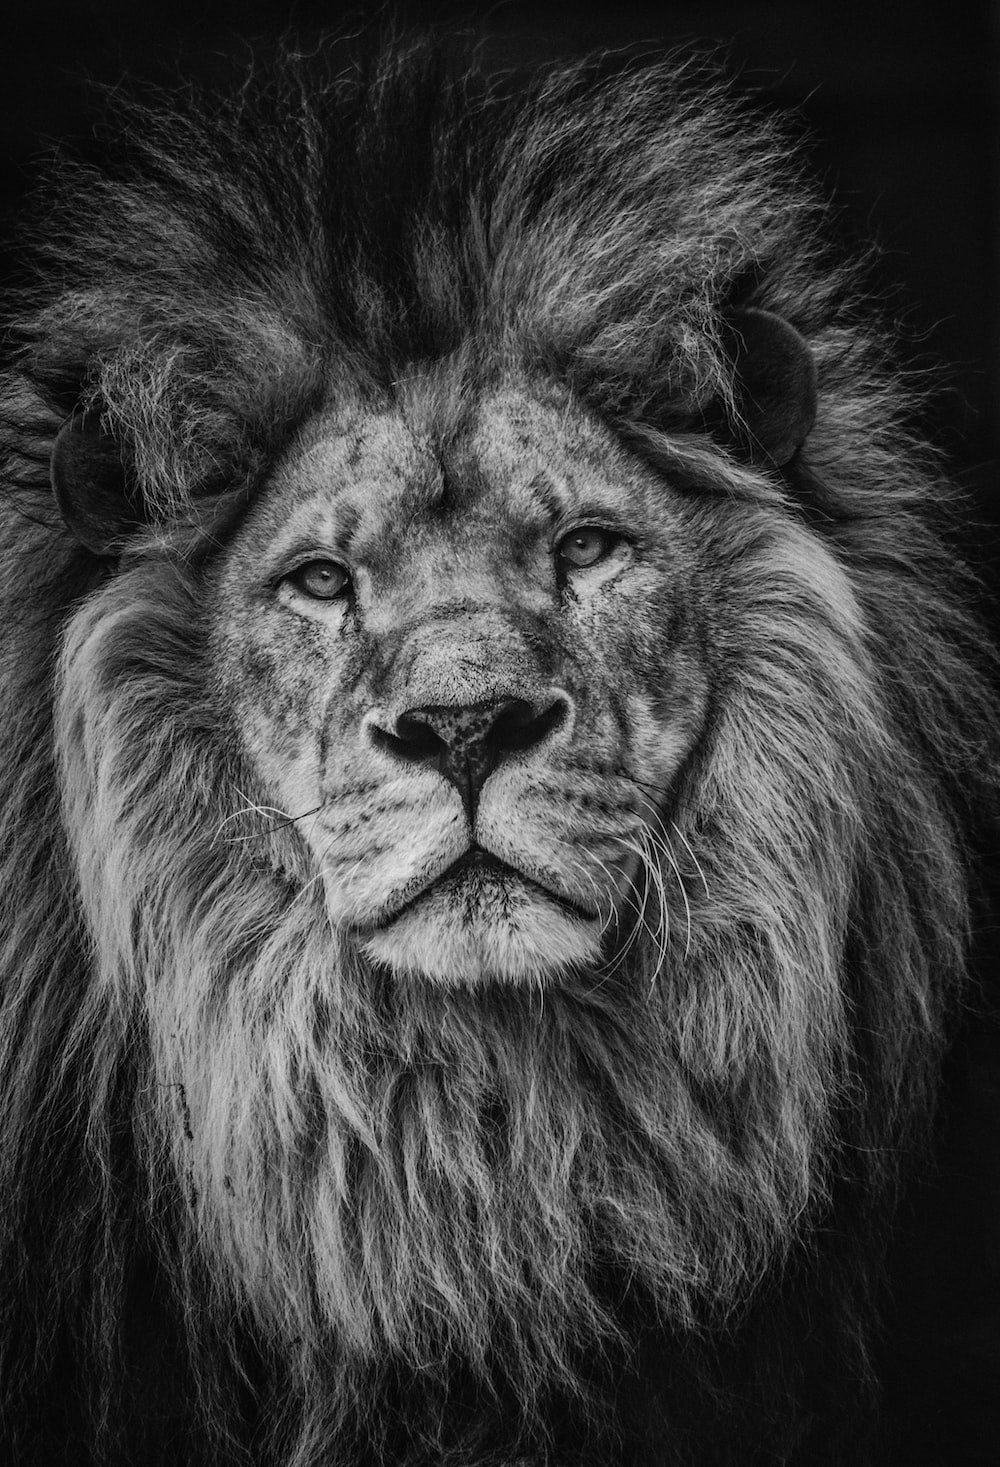 Lion Head Picture. Download Free Image